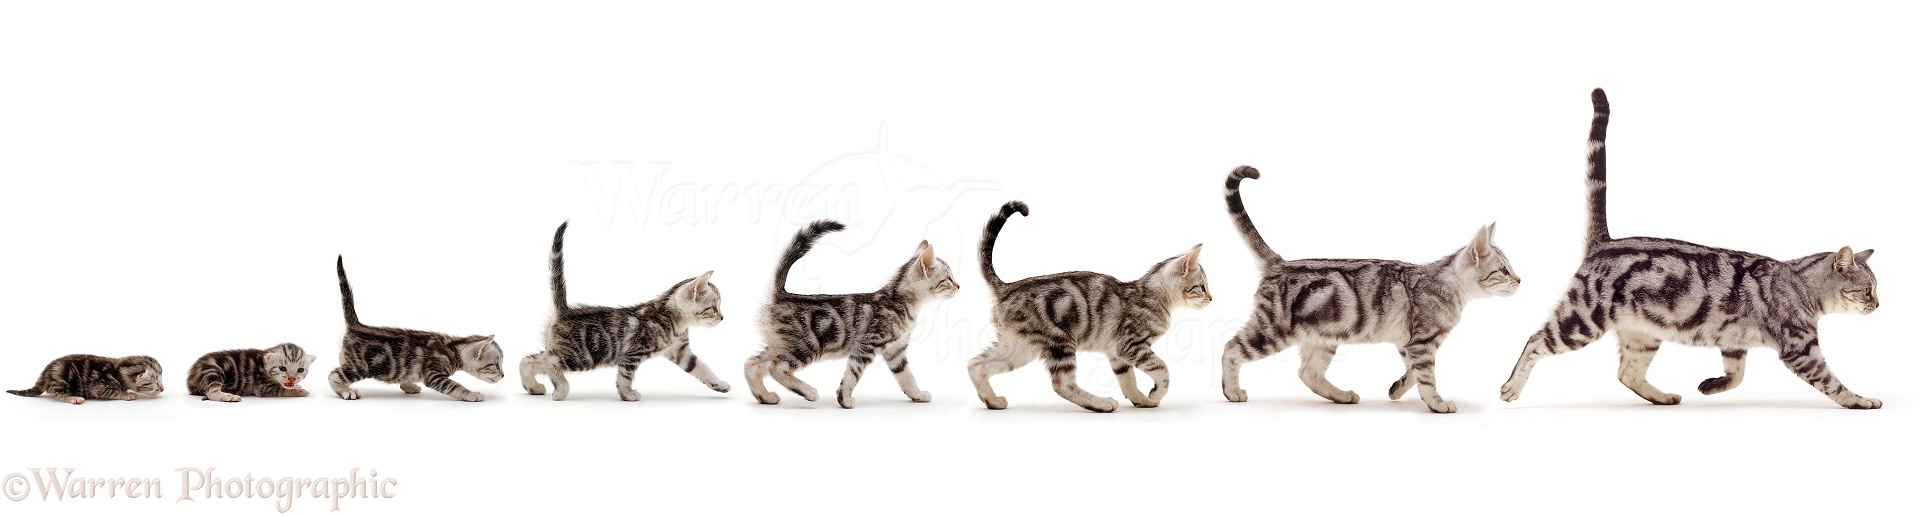 42493-silver-tabby-cat-growing-up-sequence-stages-white-background.jpg